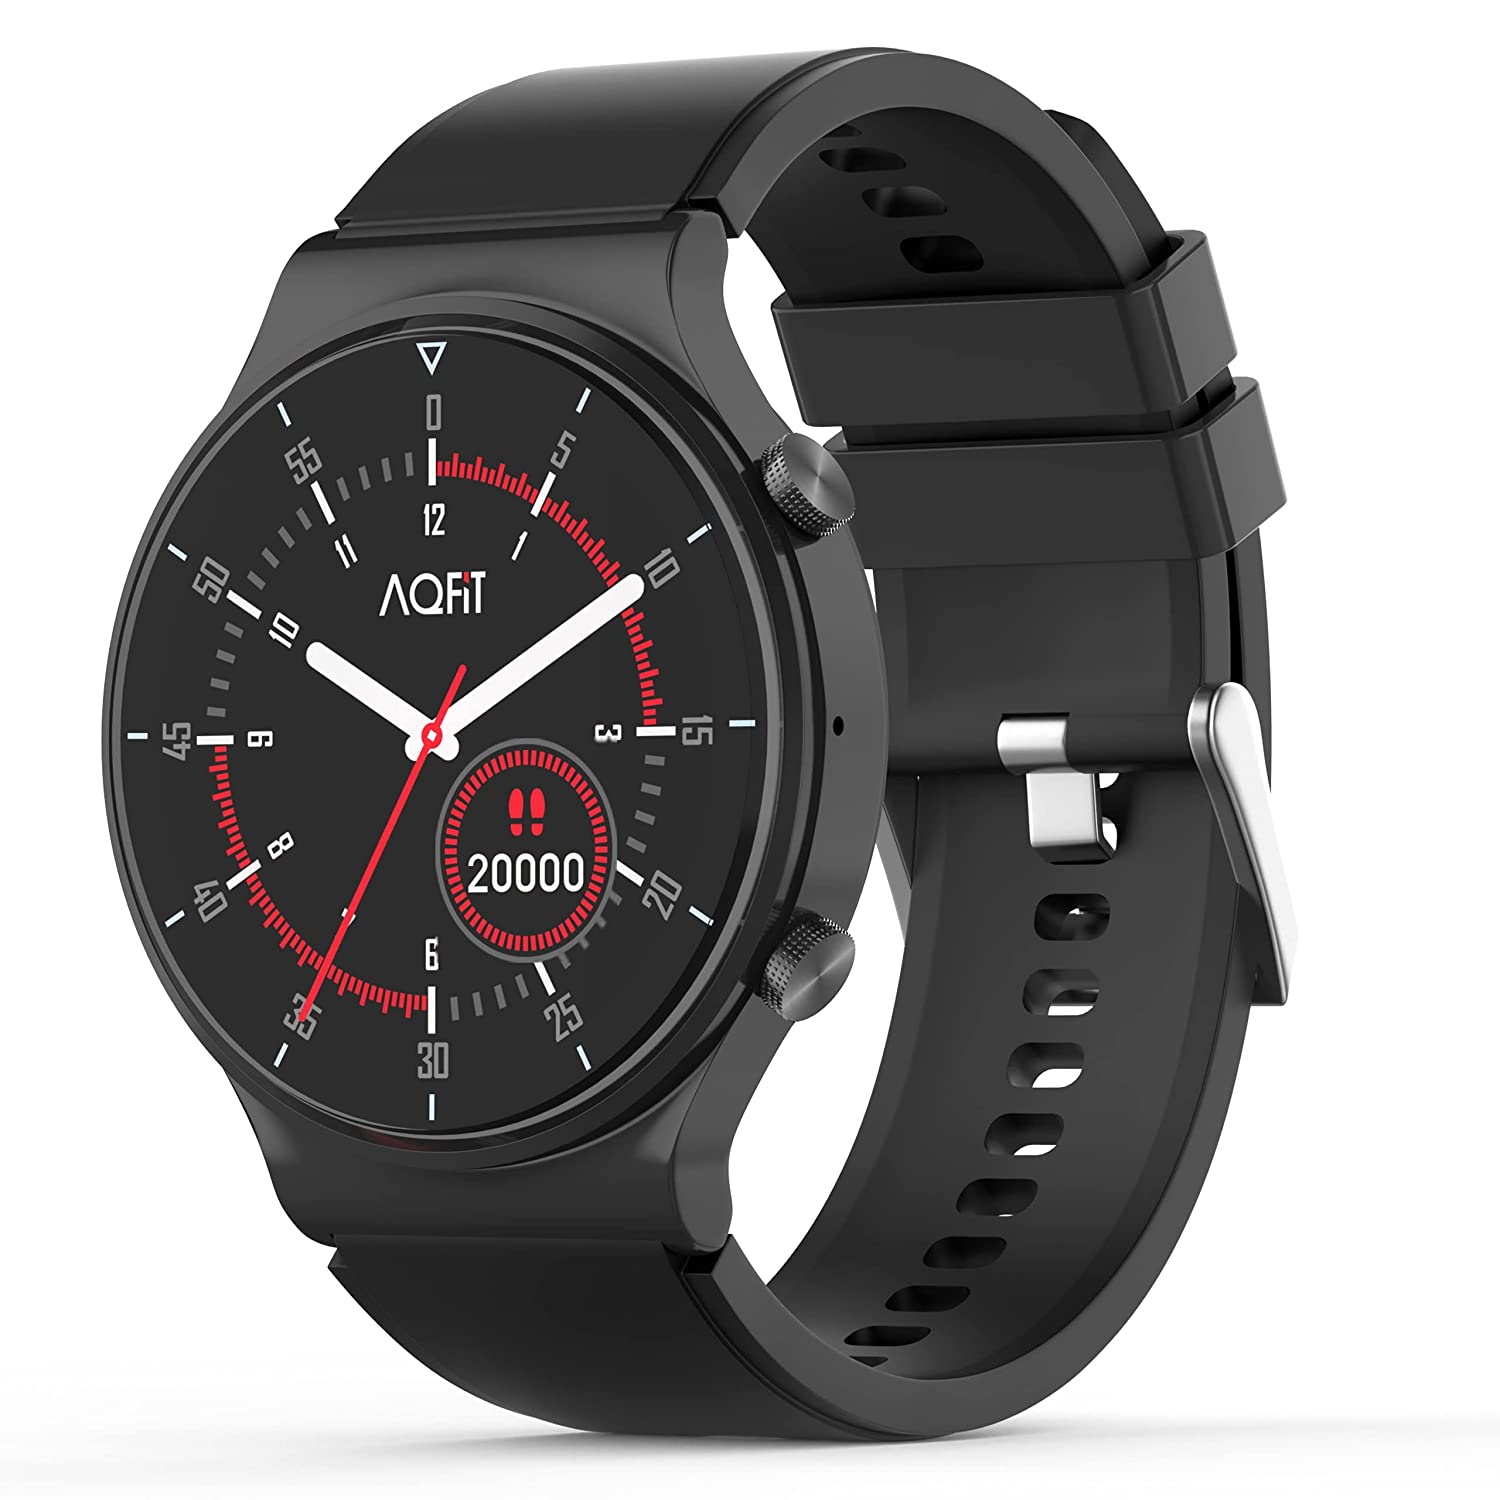 AQFIT W16 1.69 inch , 2.5D Curved Display & Multiple Sports Mode Smartwatch  Price in India - Buy AQFIT W16 1.69 inch , 2.5D Curved Display & Multiple  Sports Mode Smartwatch online at Flipkart.com